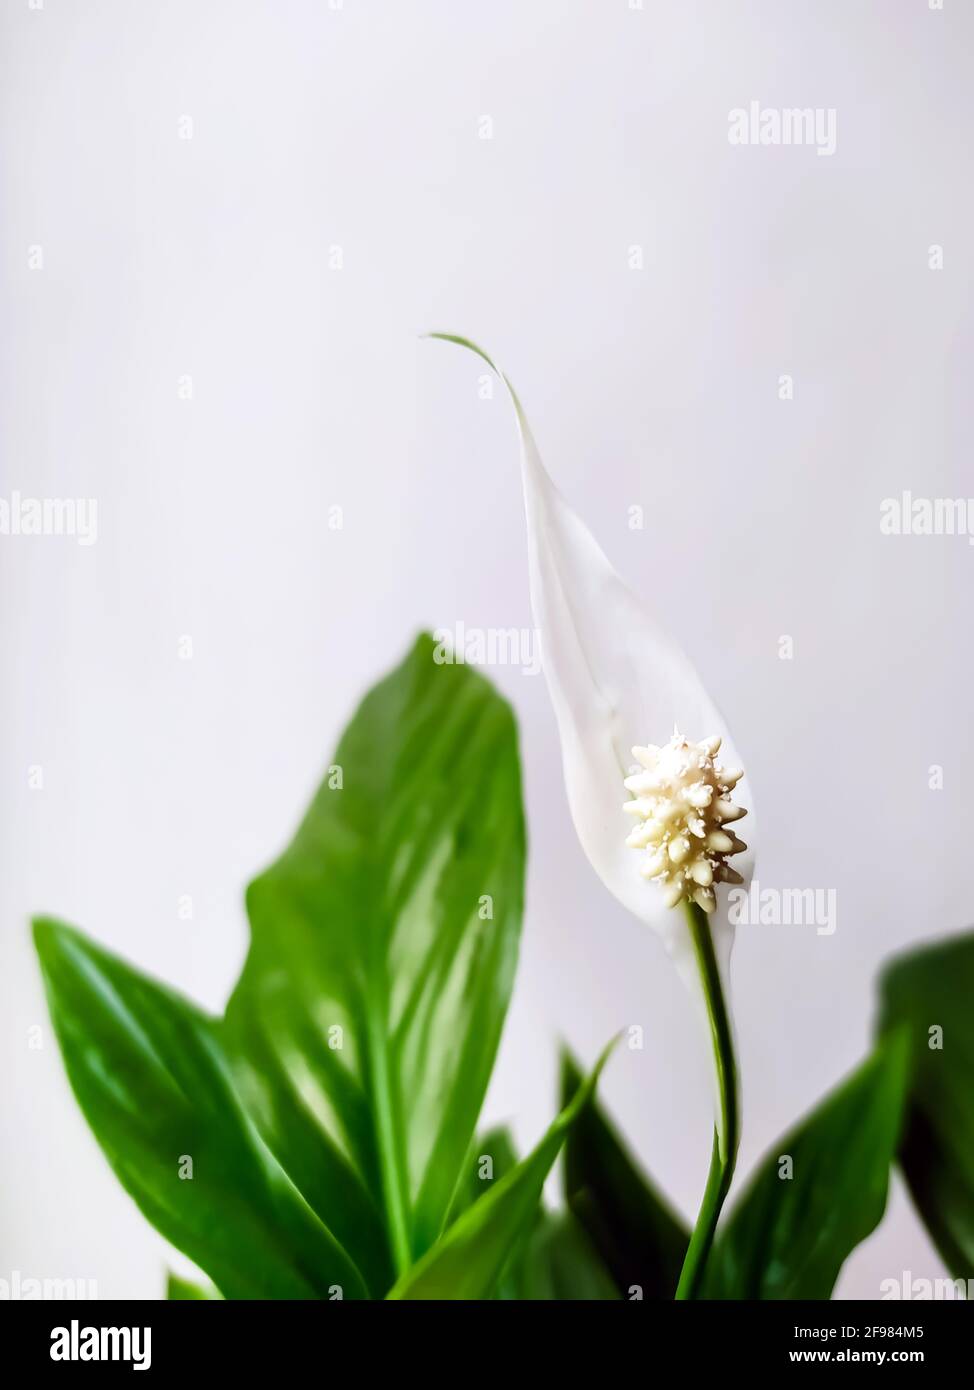 blooming spathiphyllum flower with green leaves on a light background Stock Photo